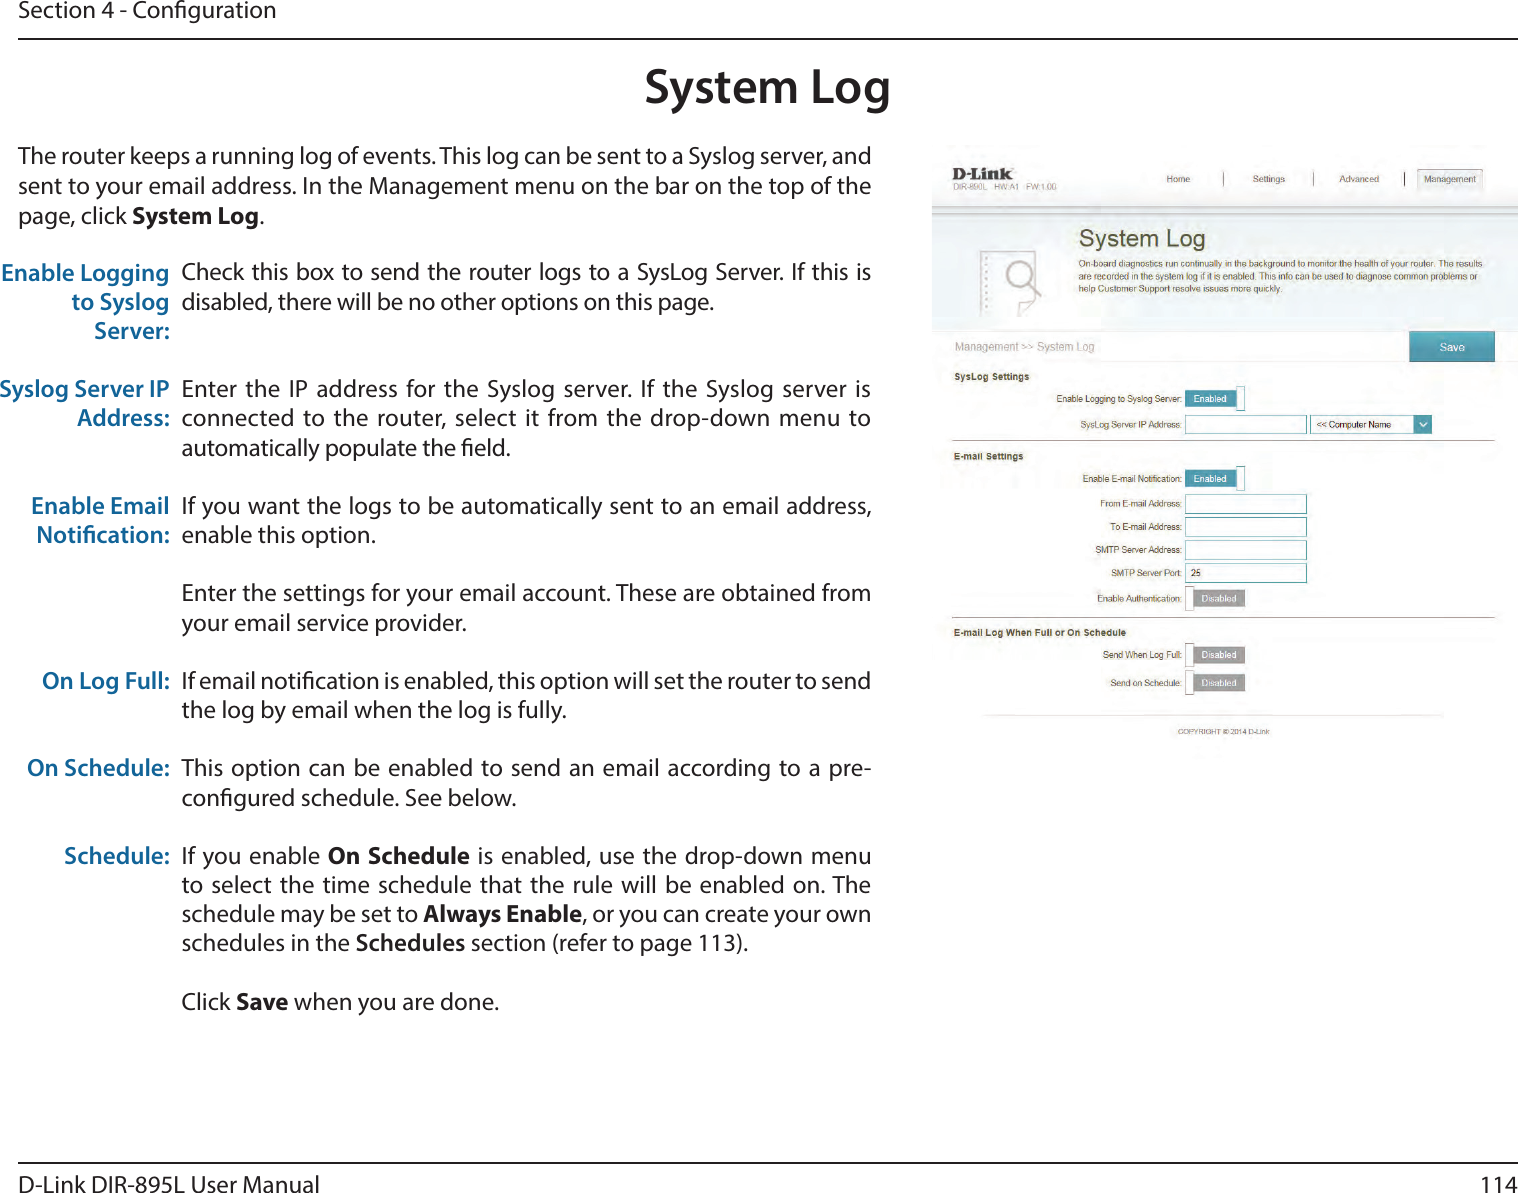 114D-Link DIR-895L User ManualSection 4 - CongurationSystem LogCheck this box to send the router logs to a SysLog Server. If this is disabled, there will be no other options on this page.Enter the IP address for the Syslog server. If the Syslog server is connected to the router, select it from the drop-down menu to automatically populate the eld. If you want the logs to be automatically sent to an email address, enable this option.Enter the settings for your email account. These are obtained from your email service provider.If email notication is enabled, this option will set the router to send the log by email when the log is fully.This option can be enabled to send an email according to a pre-congured schedule. See below.If you enable On Schedule is enabled, use the drop-down menu to select the time schedule that the rule will be enabled on. The schedule may be set to Always Enable, or you can create your own schedules in the Schedules section (refer to page 113).Click Save when you are done.Enable Logging to Syslog Server:Syslog Server IP Address:Enable Email Notication:On Log Full:On Schedule:Schedule:The router keeps a running log of events. This log can be sent to a Syslog server, and sent to your email address. In the Management menu on the bar on the top of the page, click System Log. 